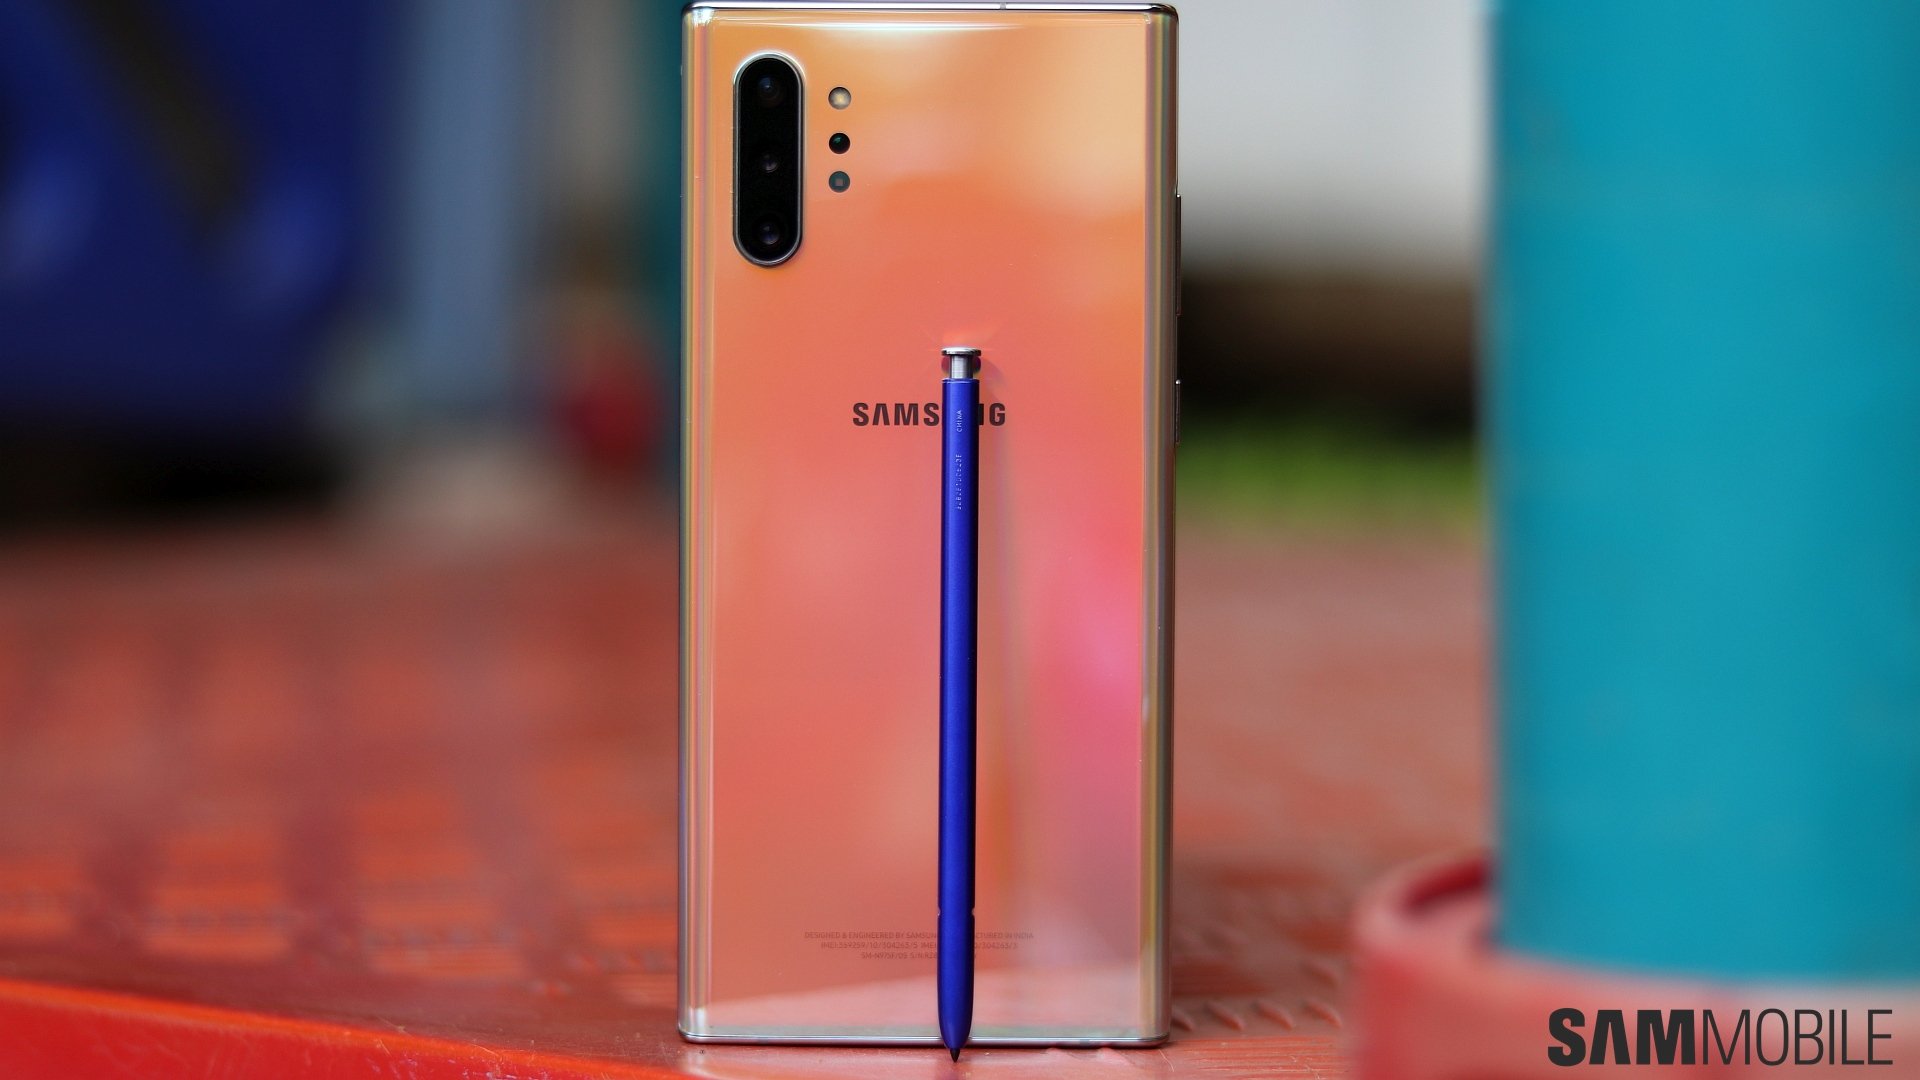 Samsung Galaxy Note 10 Lite review: a solid stylus choice - our